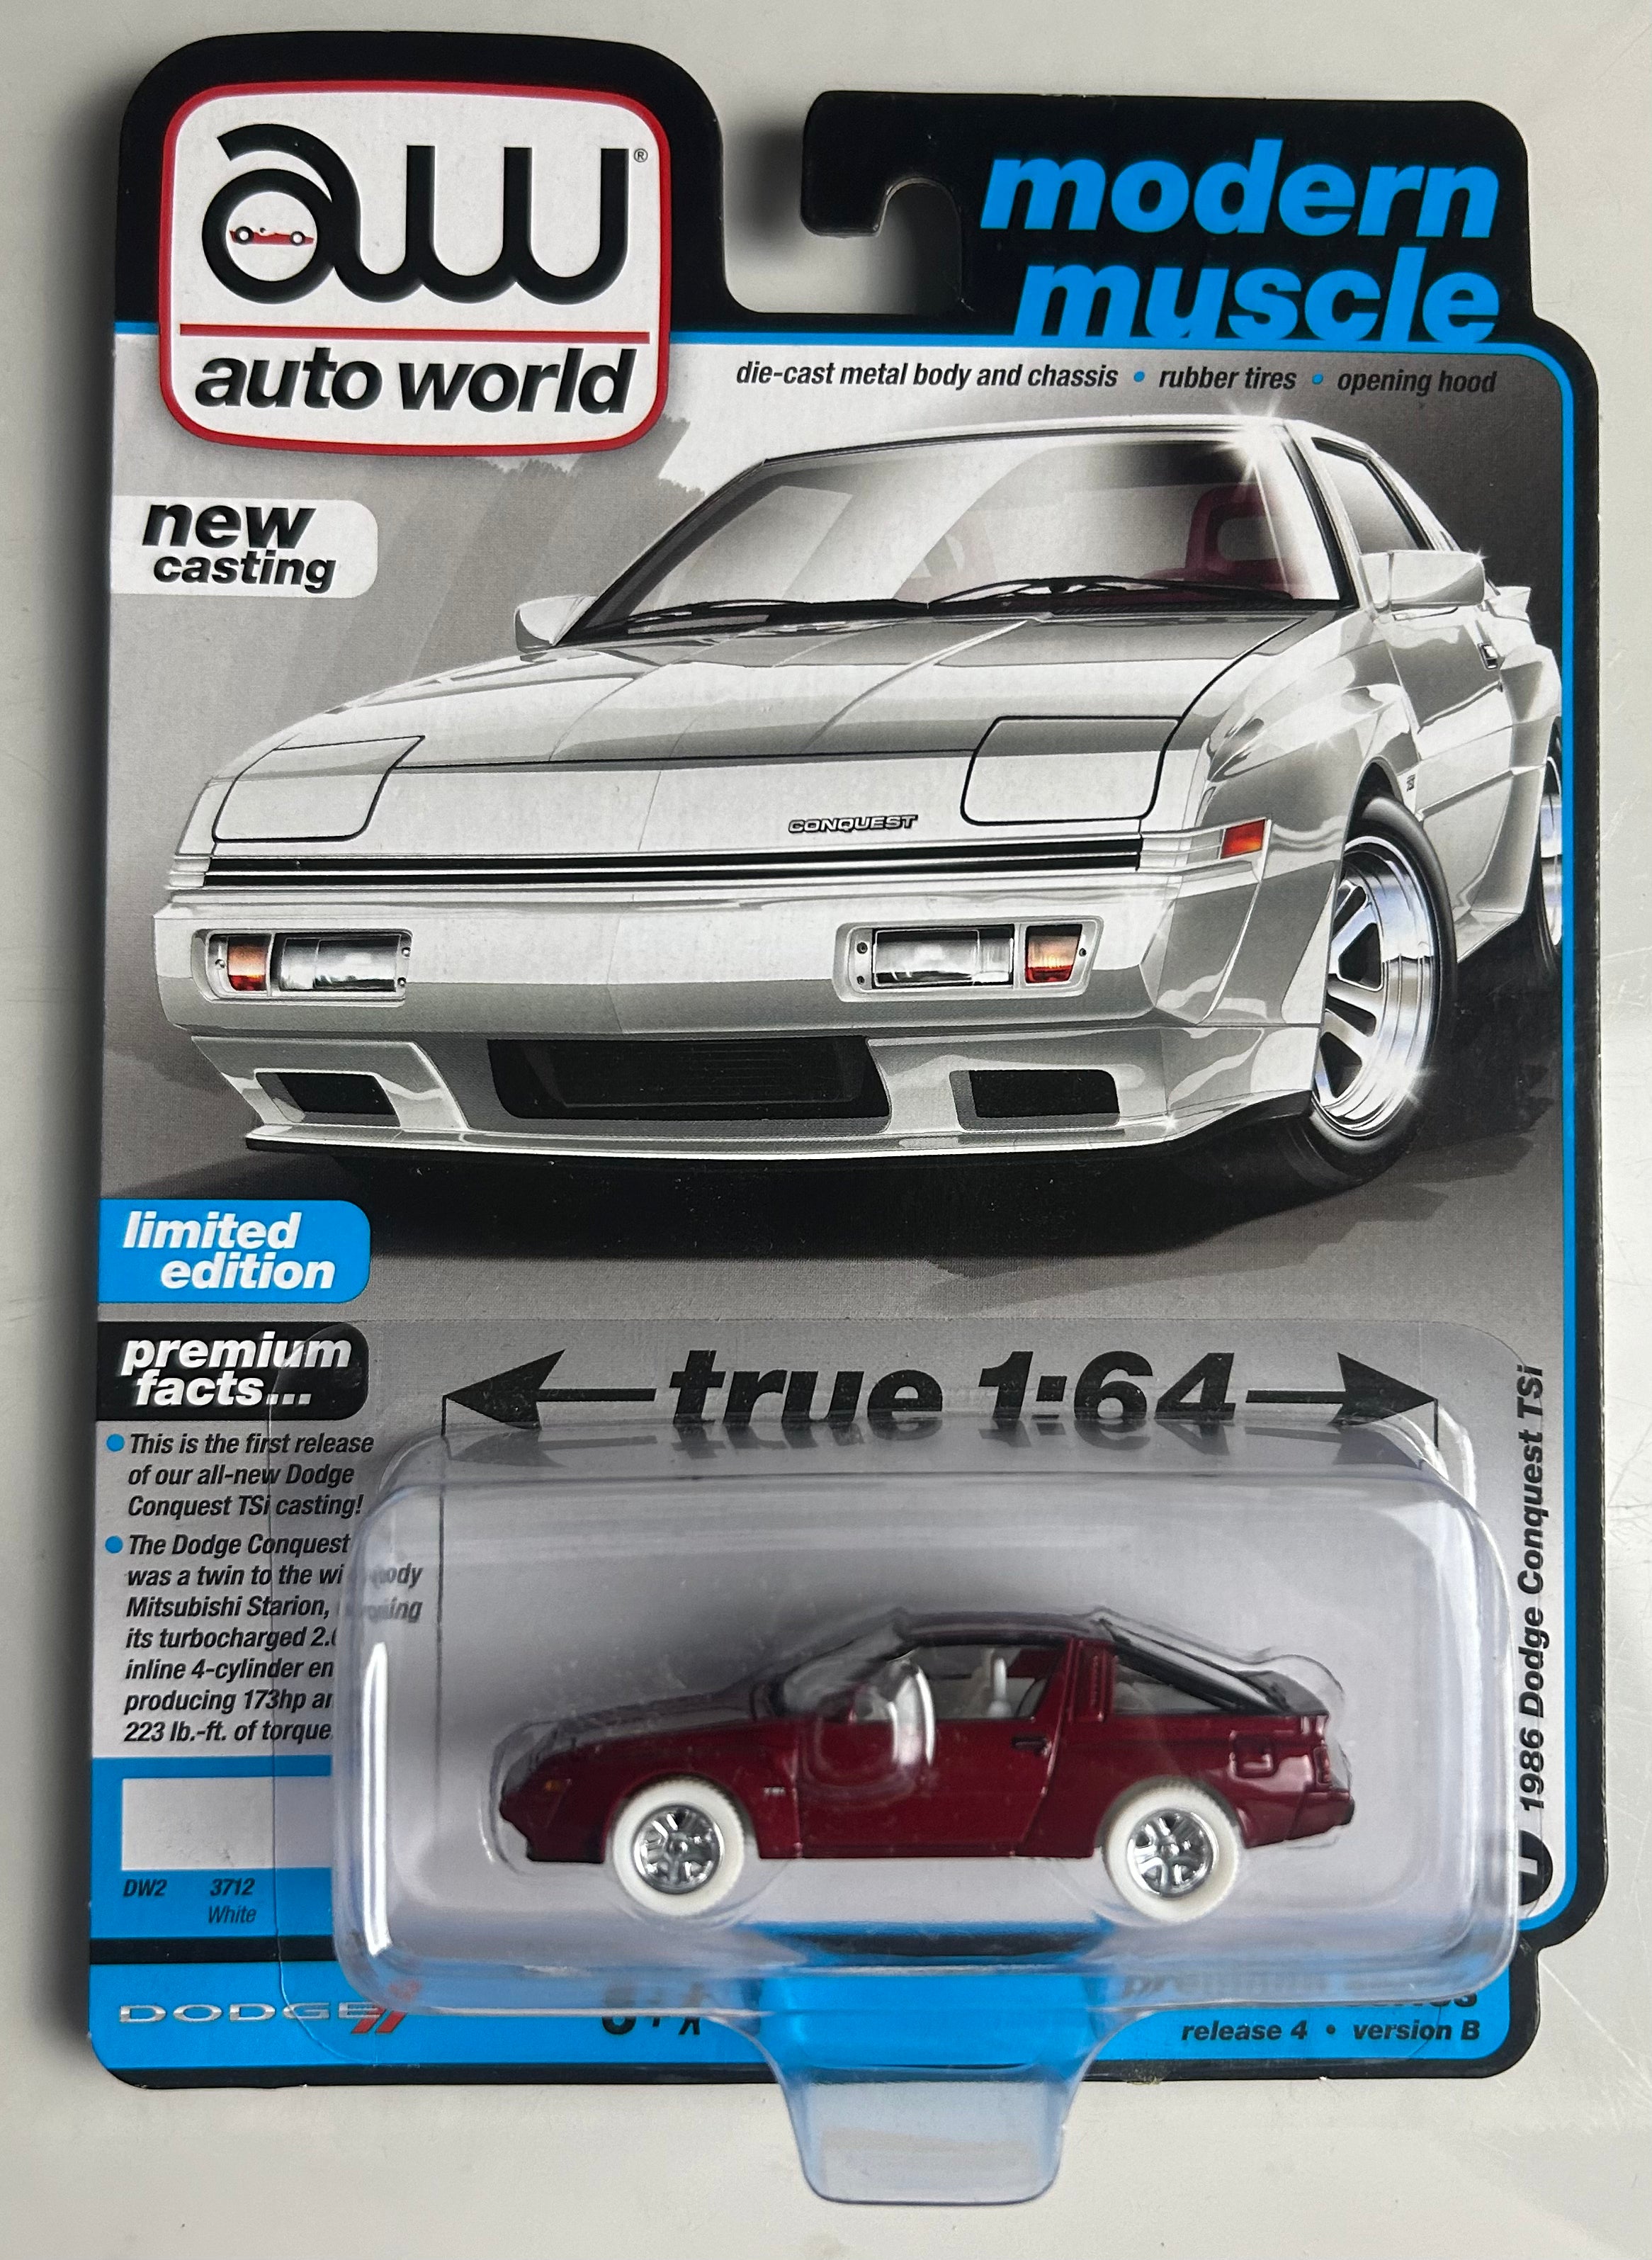 1/64 1986 DODGE CONQUEST TSI - MODERN MUSCLE "CHASE" (CANDY RED VARIATION)